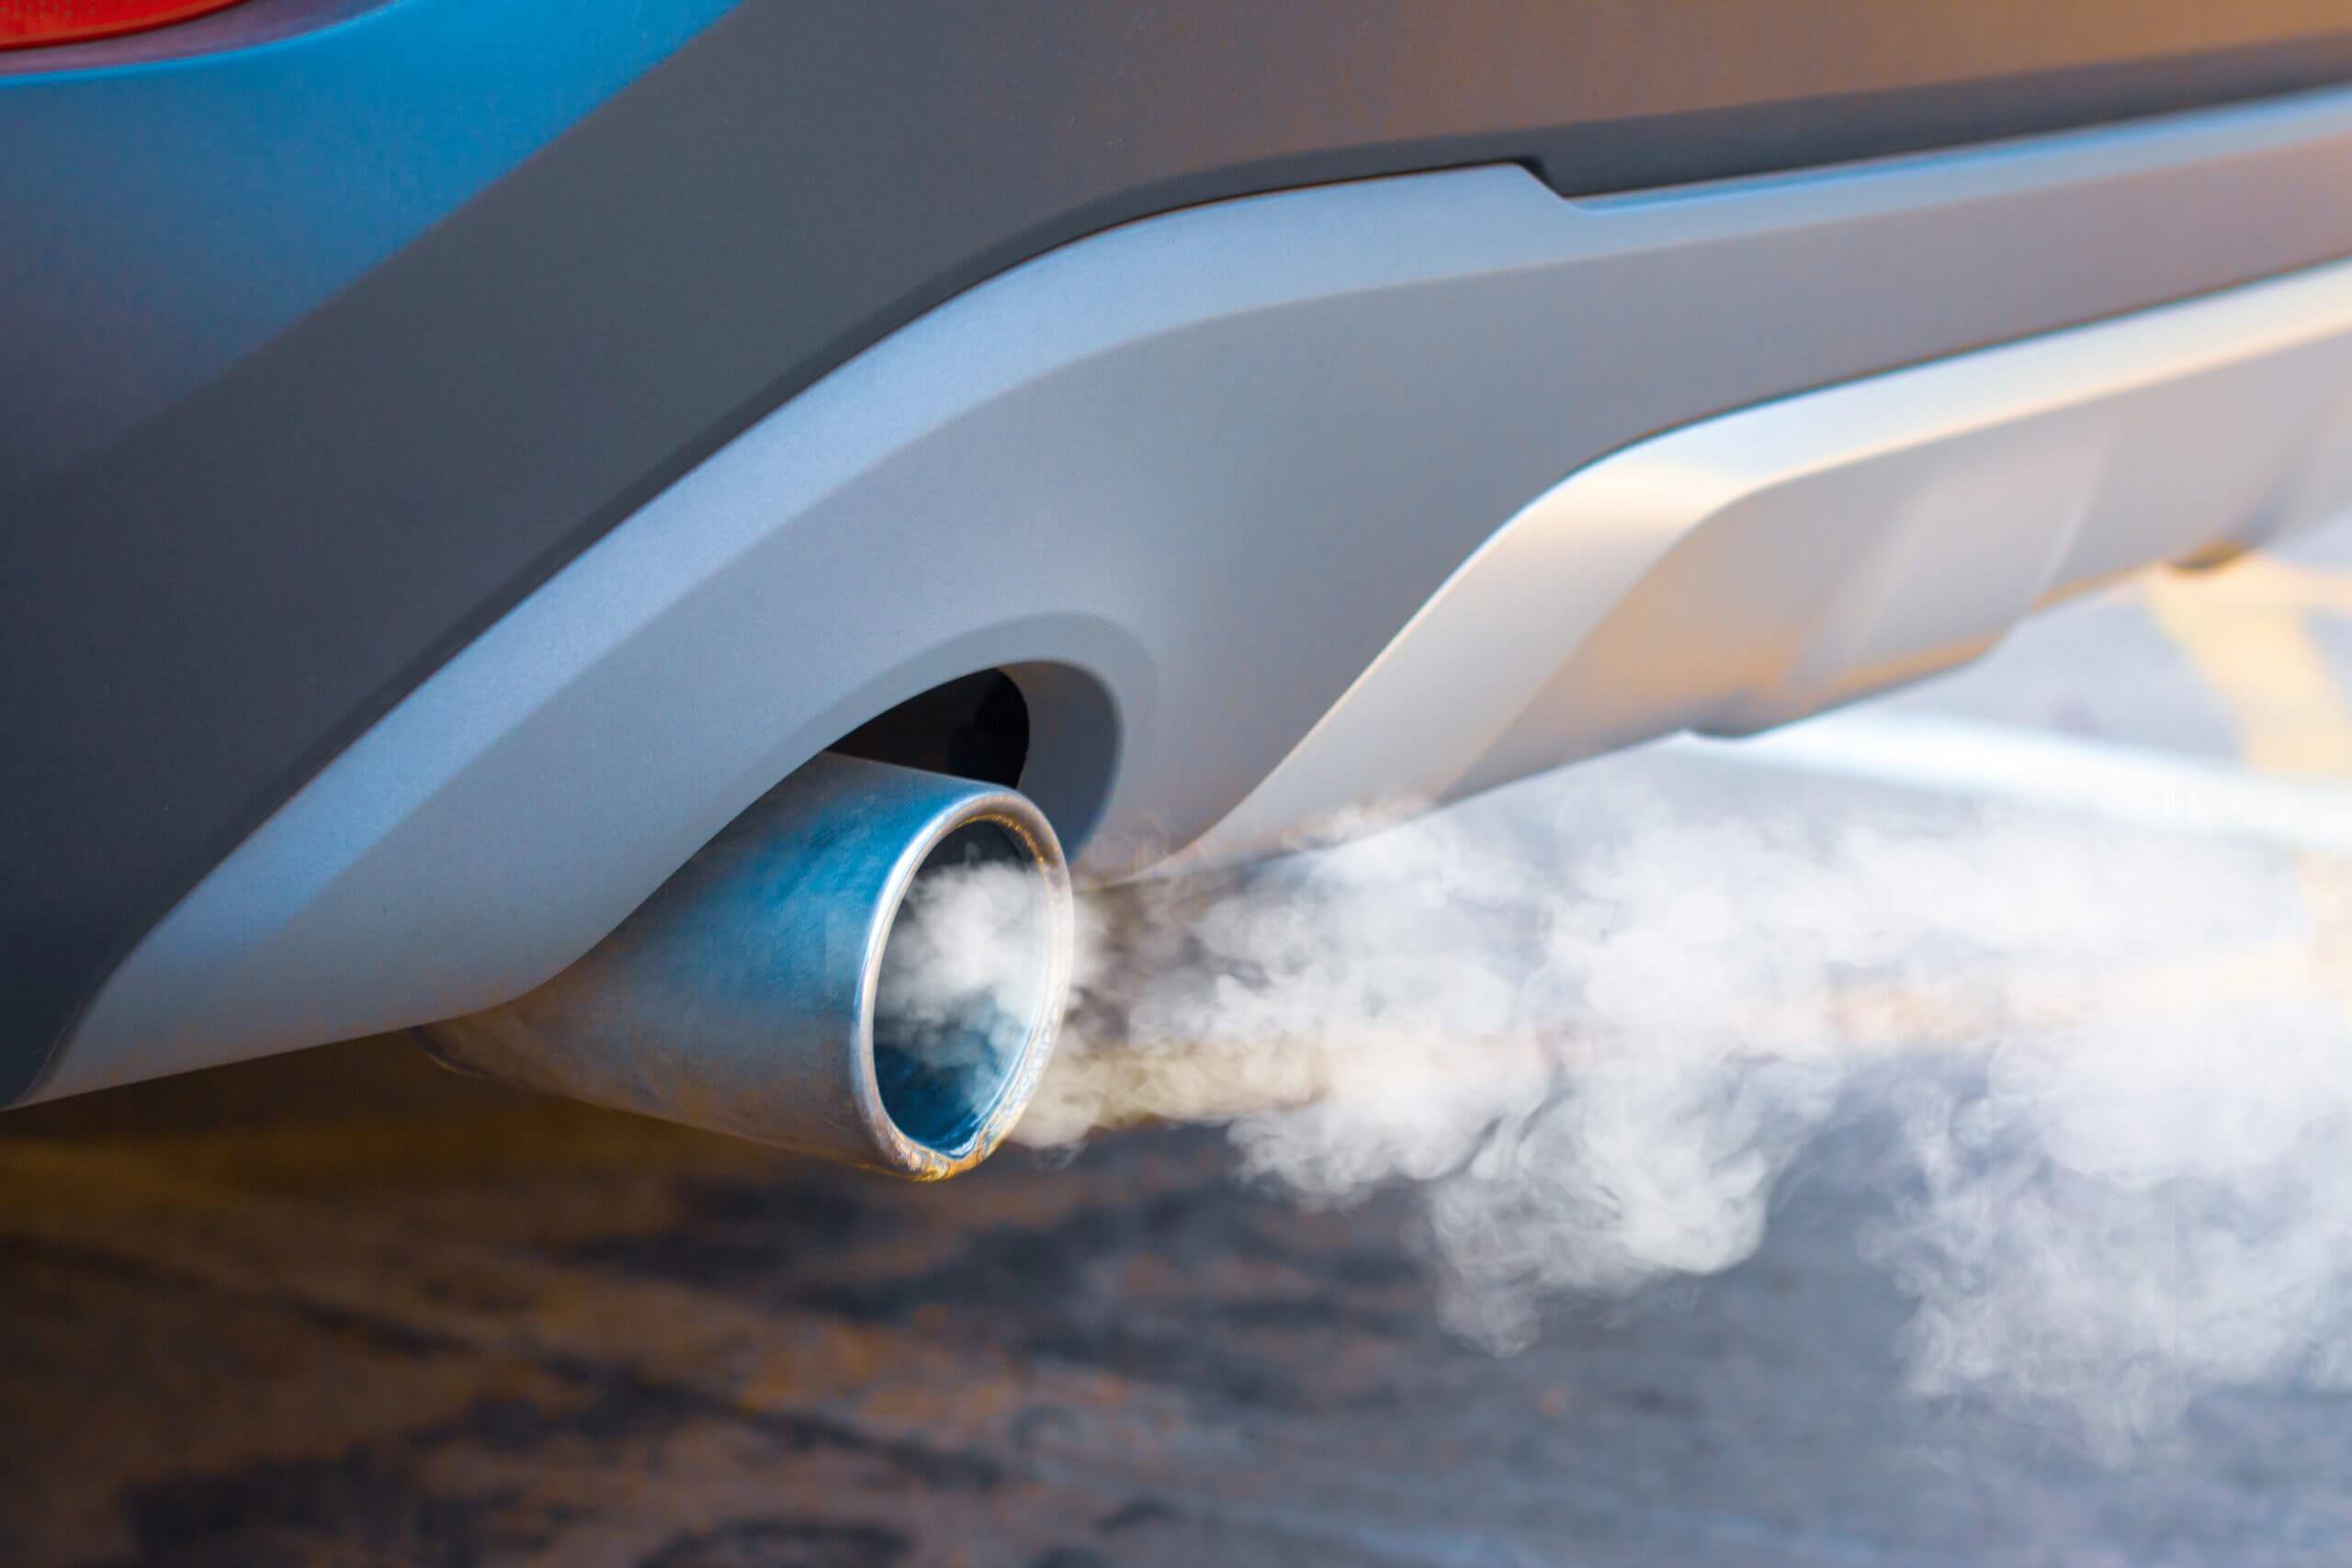 Waste smoke, the crisis of urban air pollution from car diesel engine